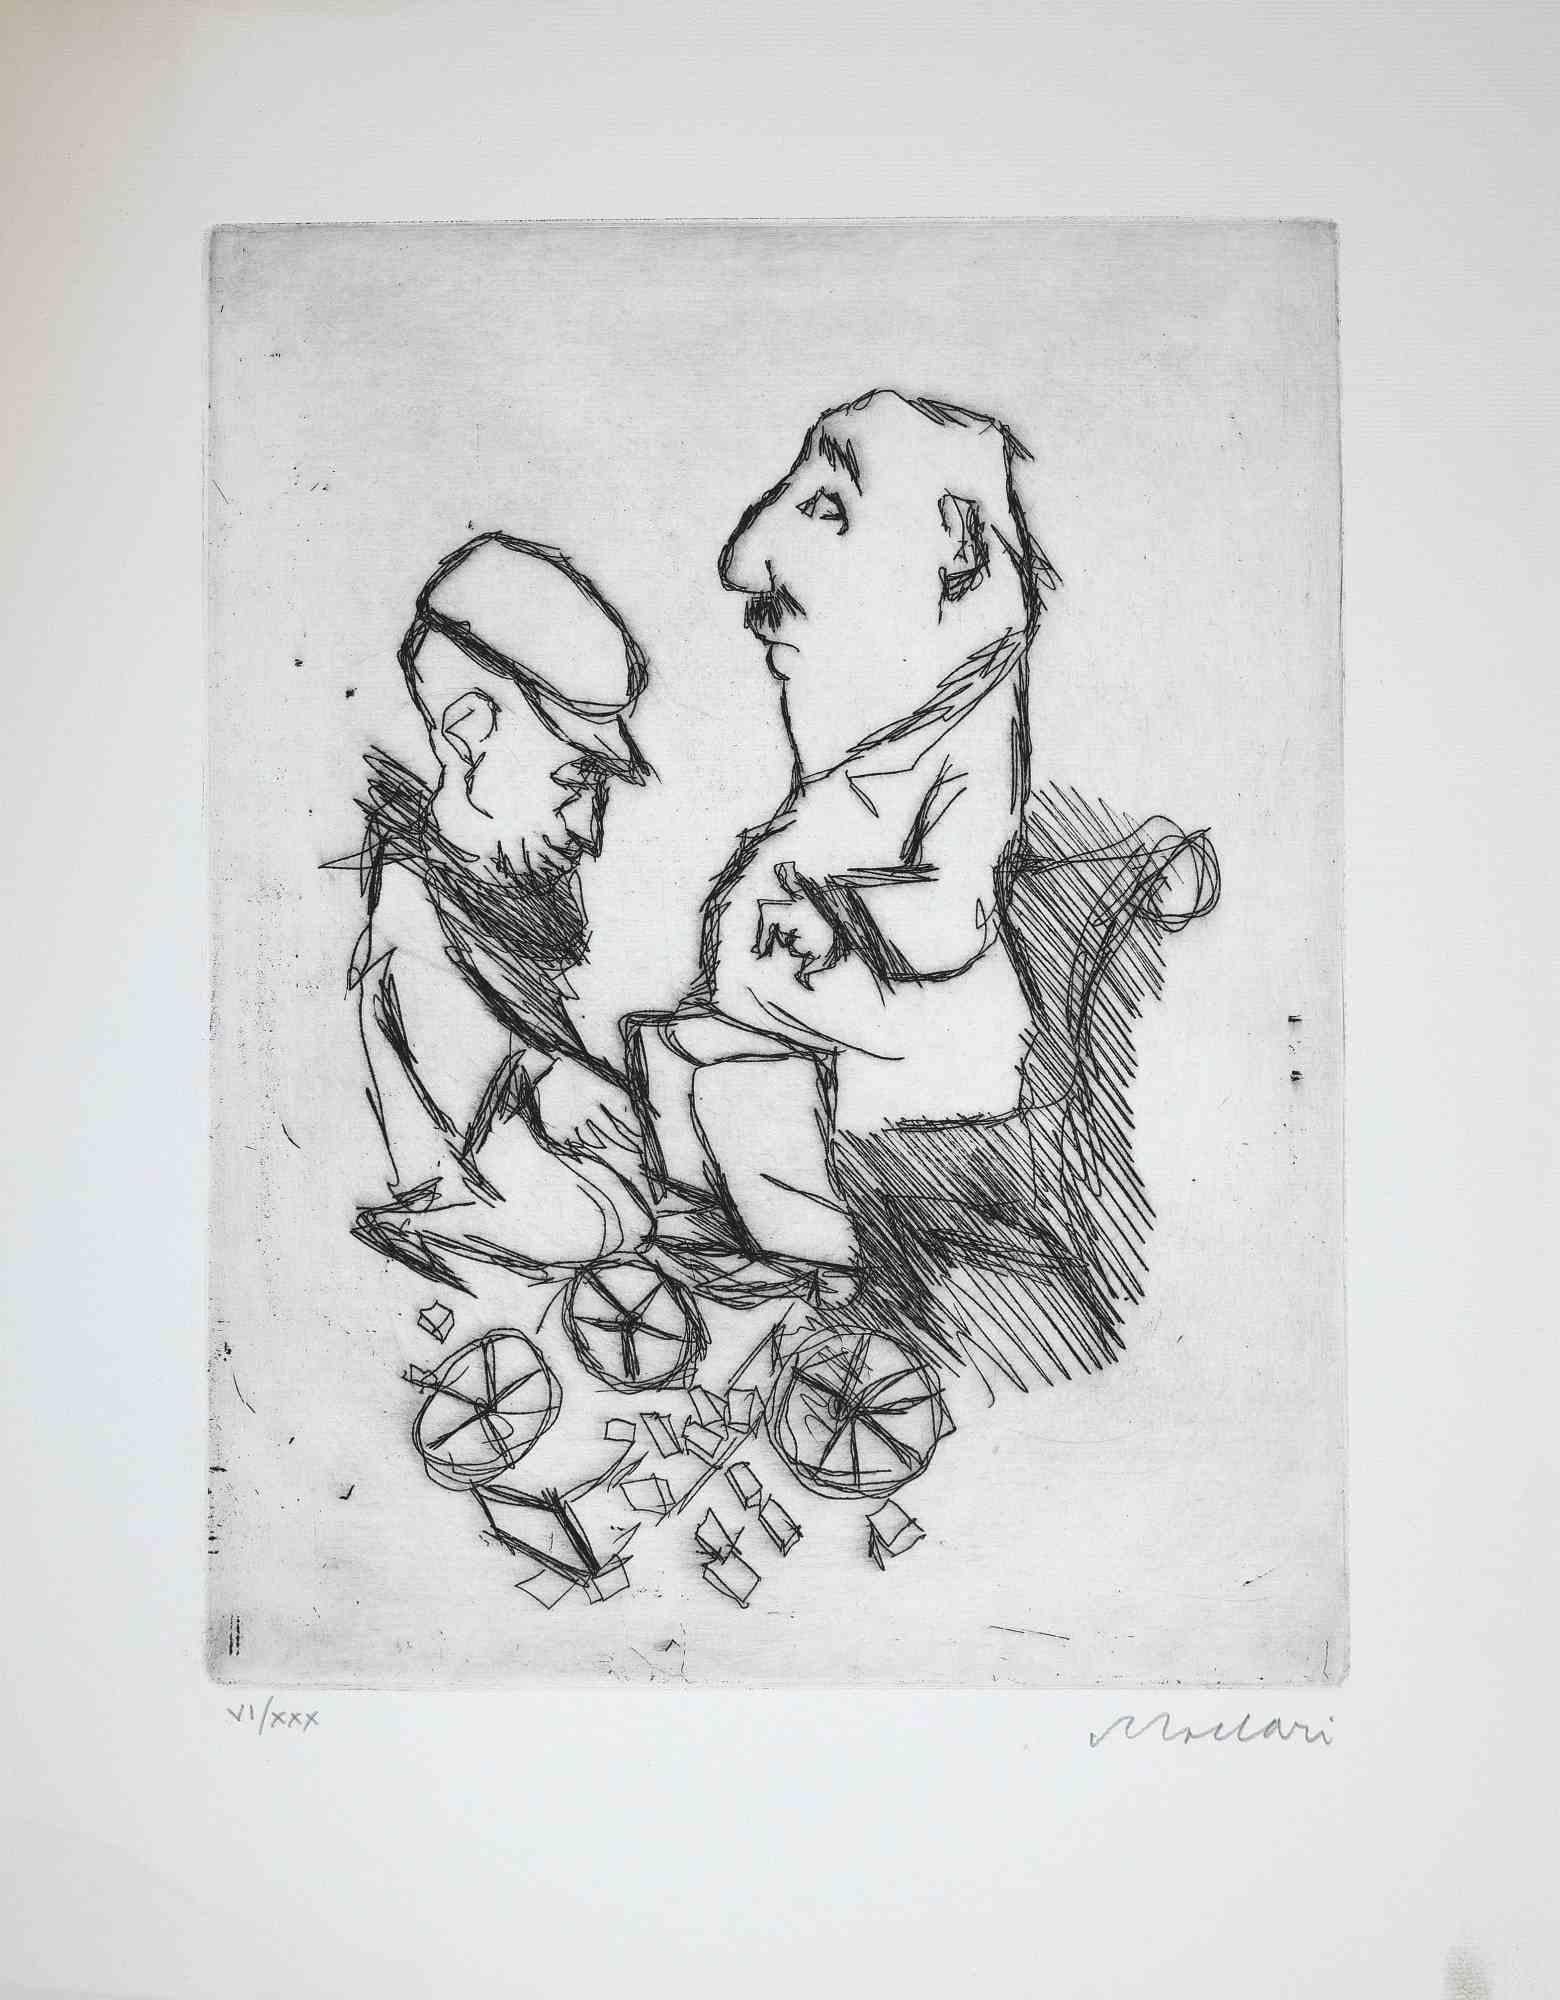 Figures is an original print realized by Mino Maccari in Mid-20th Century.

Beautiful black and white etching on ivory-colored paper. Included a passport: 49 x 34 cm.

Good condition on a yellowed paper. Edition of 30.

Hand-signed by the artist